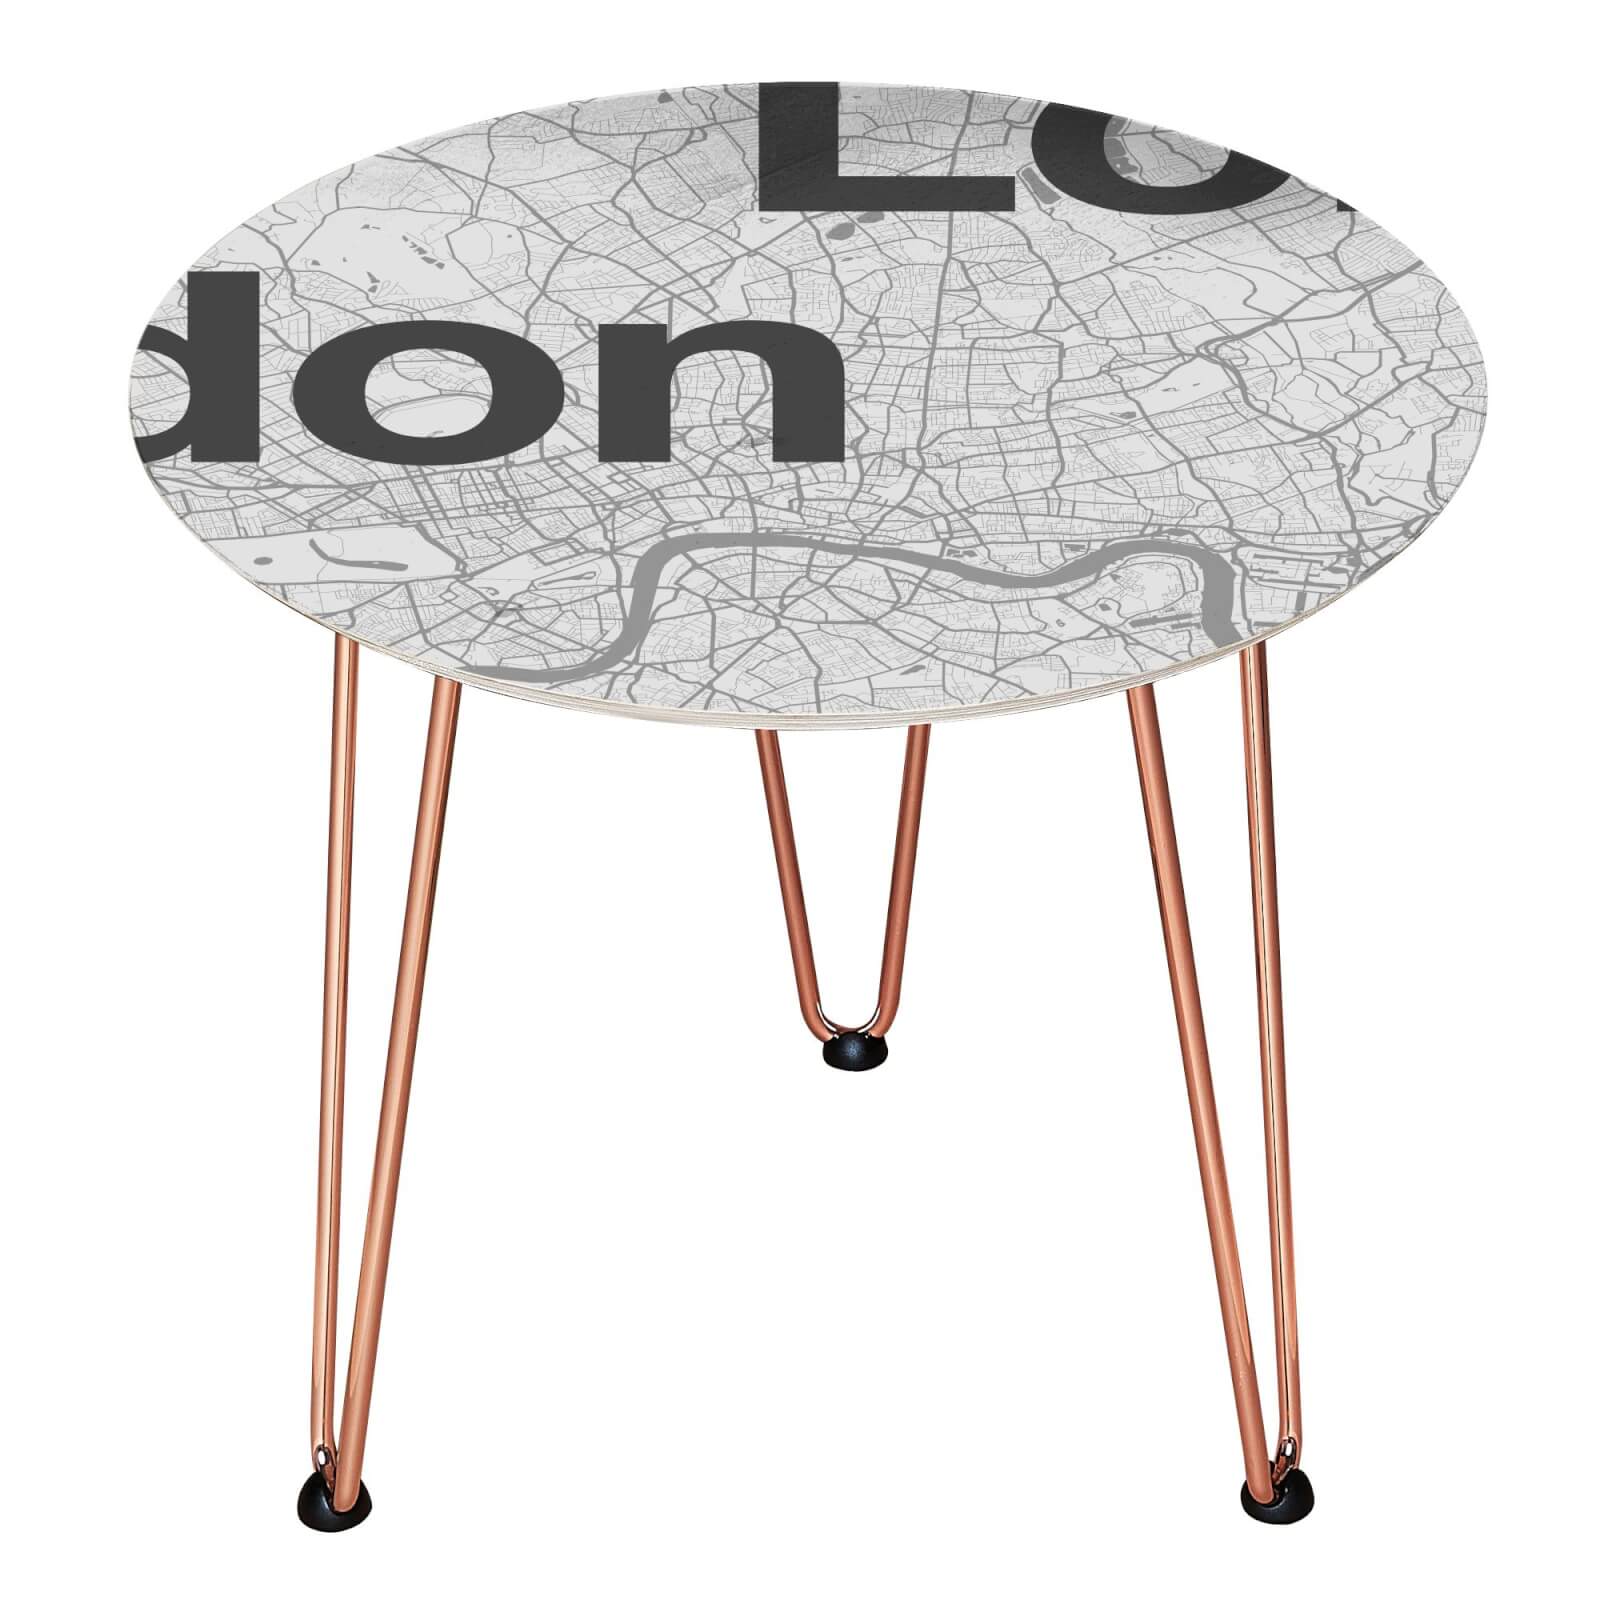 London Minimalist Map Wooden Side Table - Gold